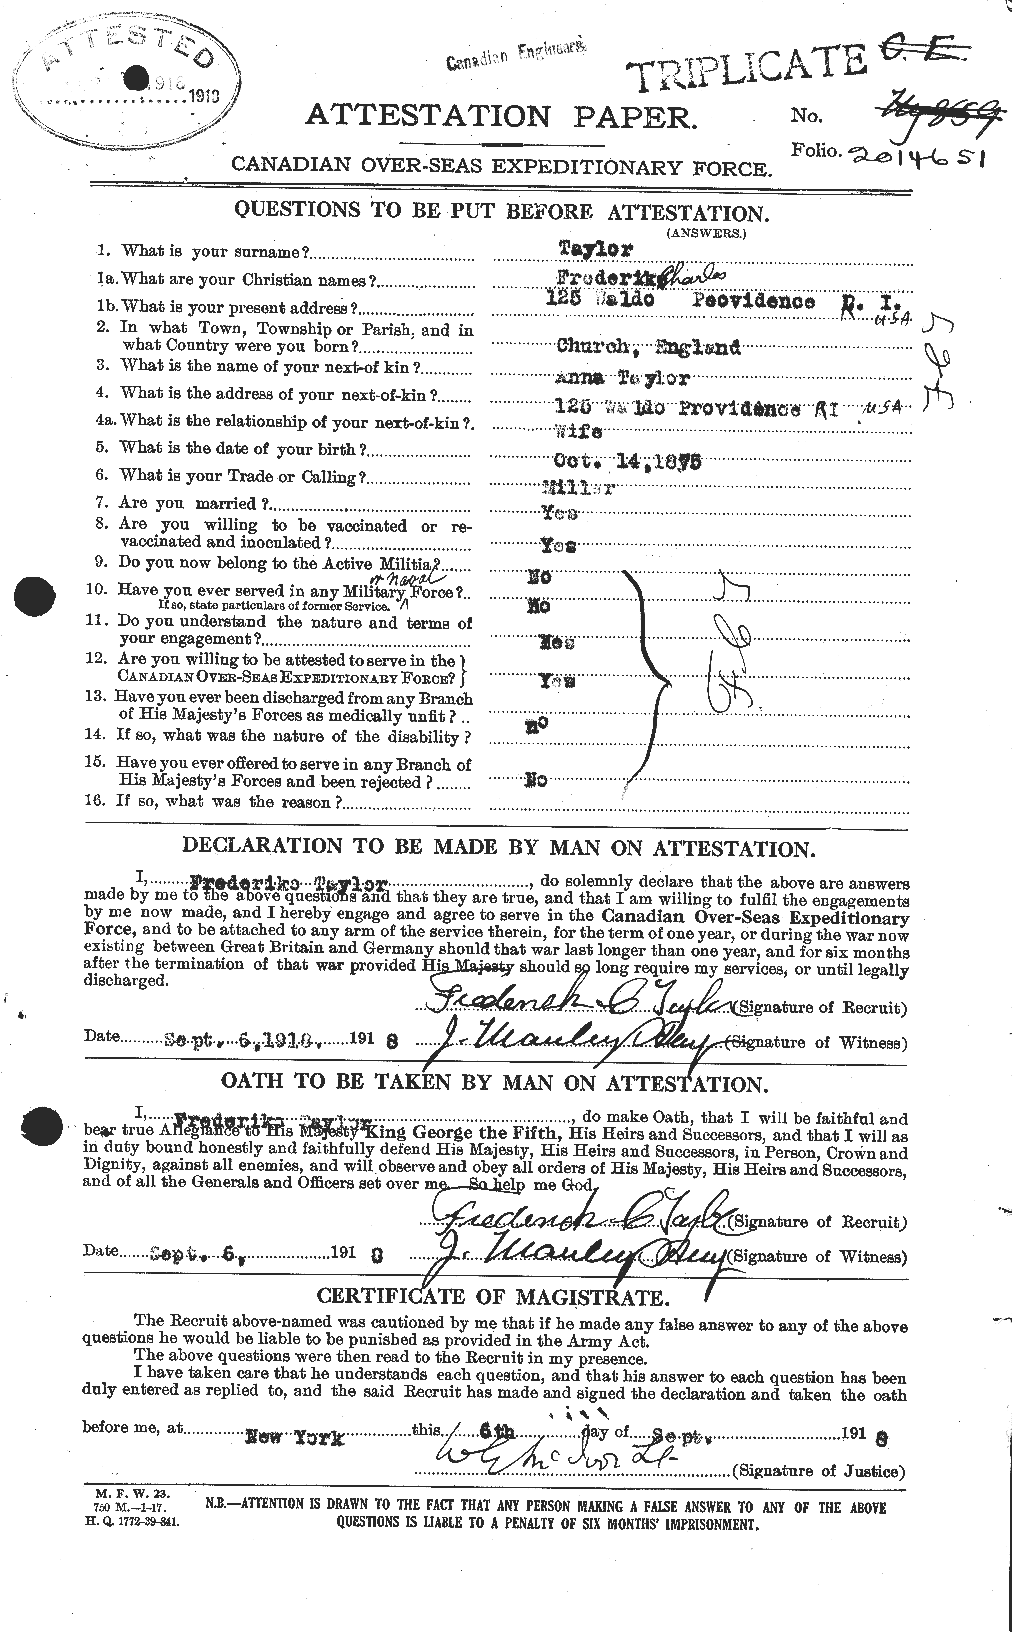 Personnel Records of the First World War - CEF 625794a